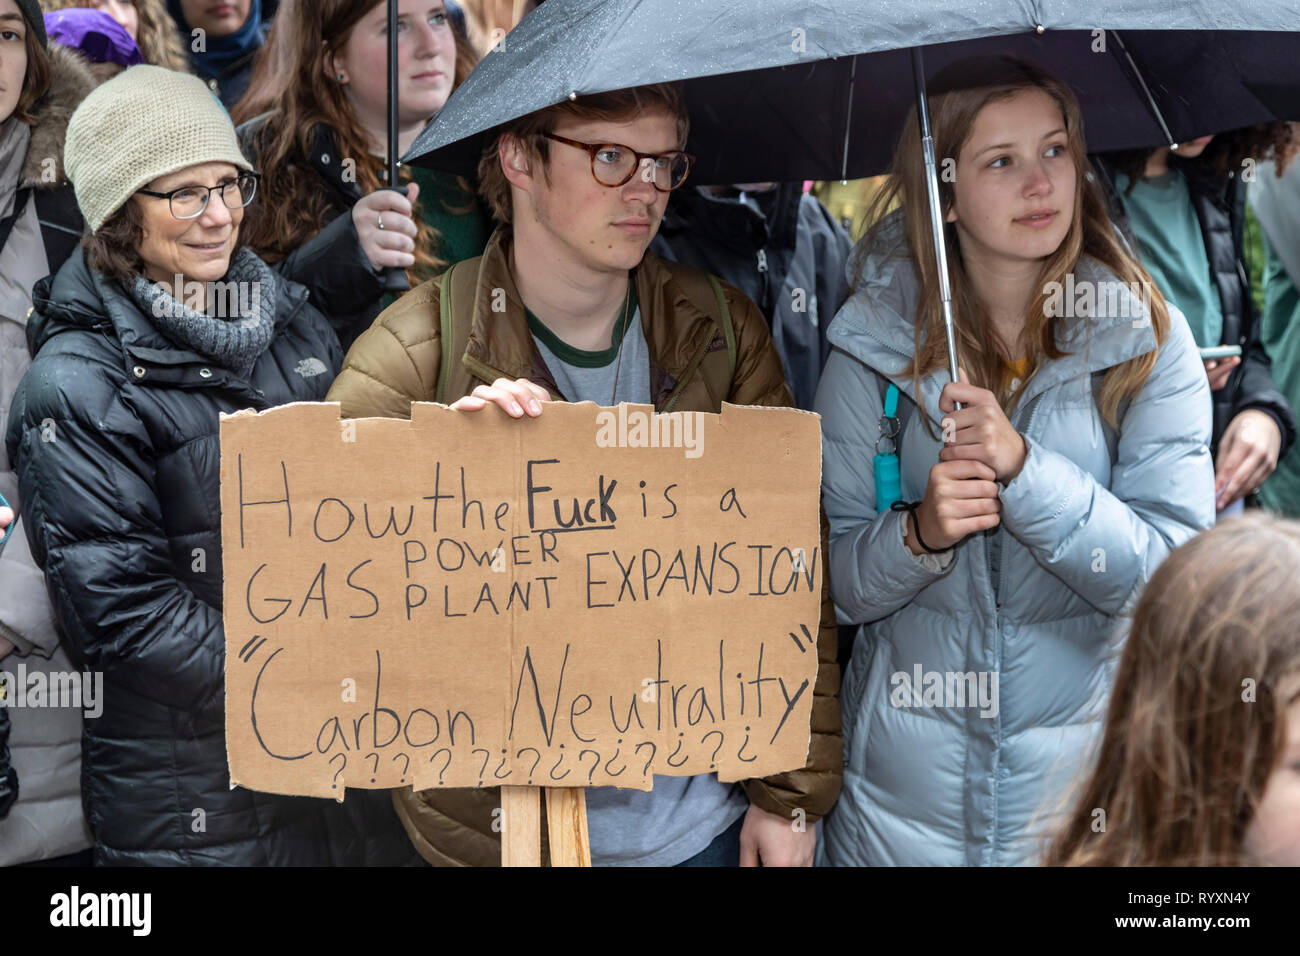 Ann Arbor, Michigan, USA. 15th Mar, 2019. Students rallied at the University of Michigan as part of an international strudent strike against climate change. They called for a reduction in greenhouse gas emissions and implementation of the Green New Deal proposed in Congress. Credit: Jim West/Alamy Live News Stock Photo